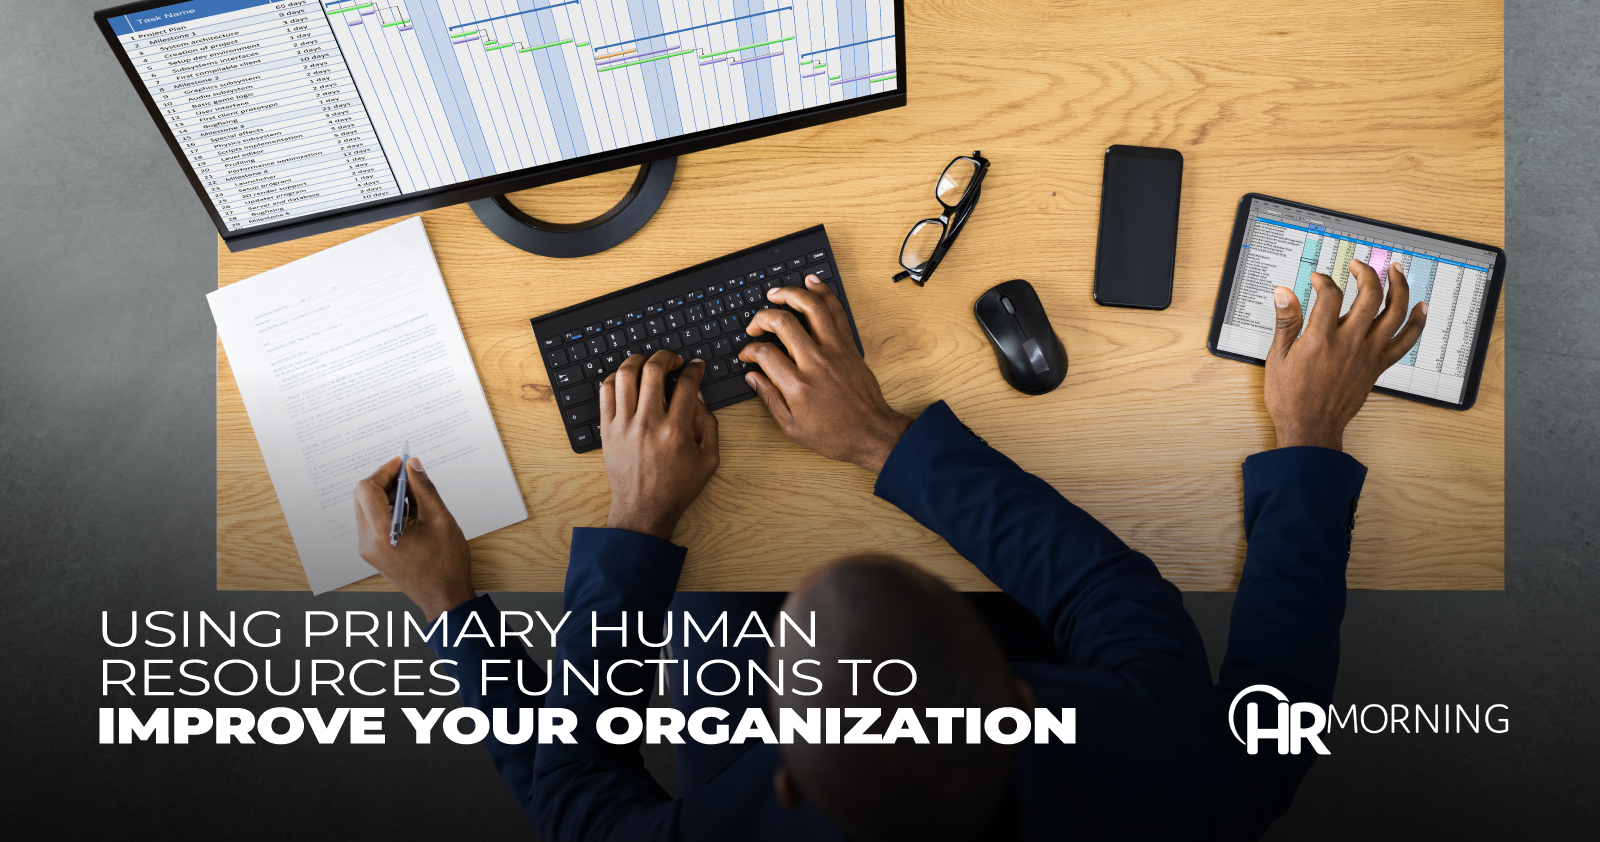 Using primary human resources functions to improve your organization